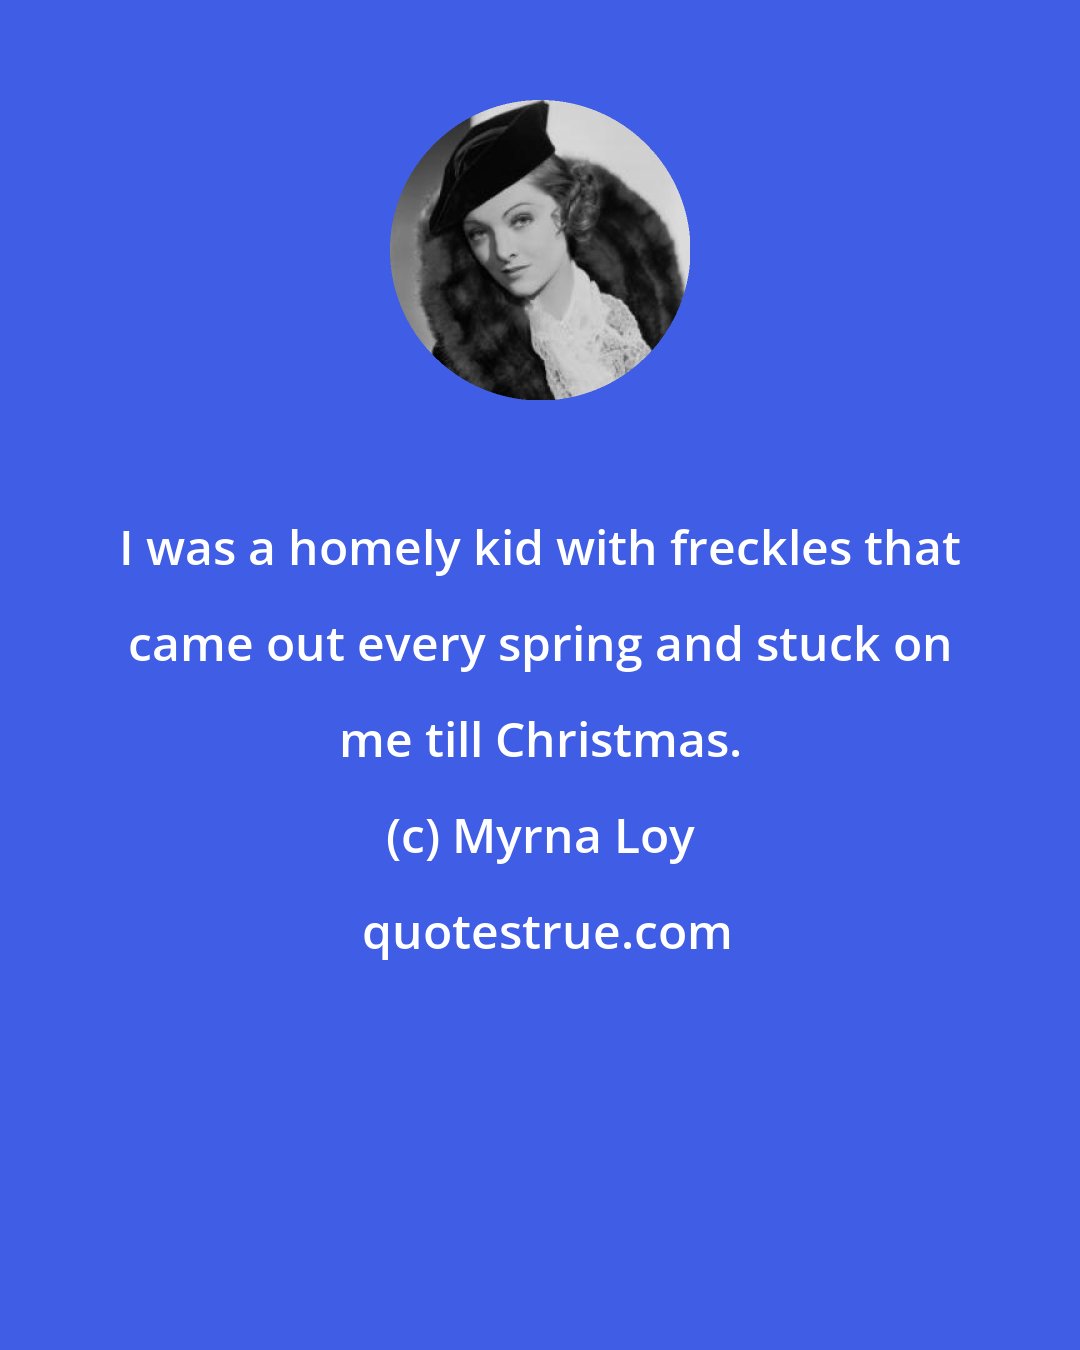 Myrna Loy: I was a homely kid with freckles that came out every spring and stuck on me till Christmas.